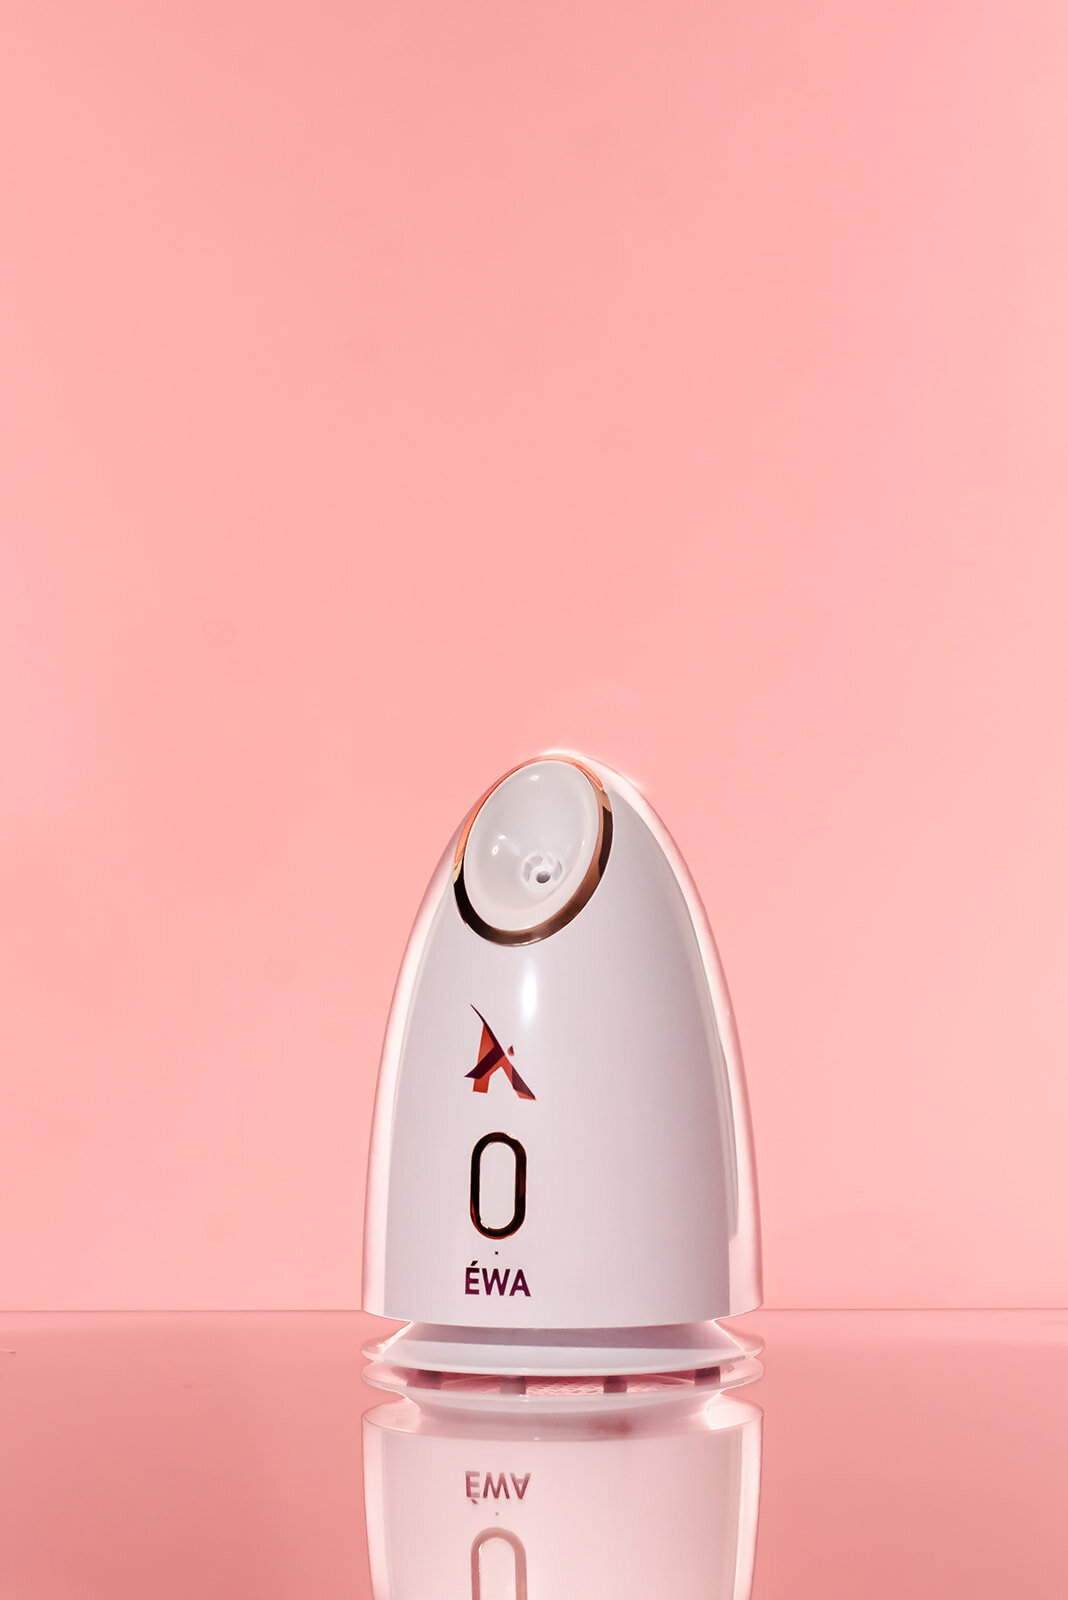 Facial steamer on pink background